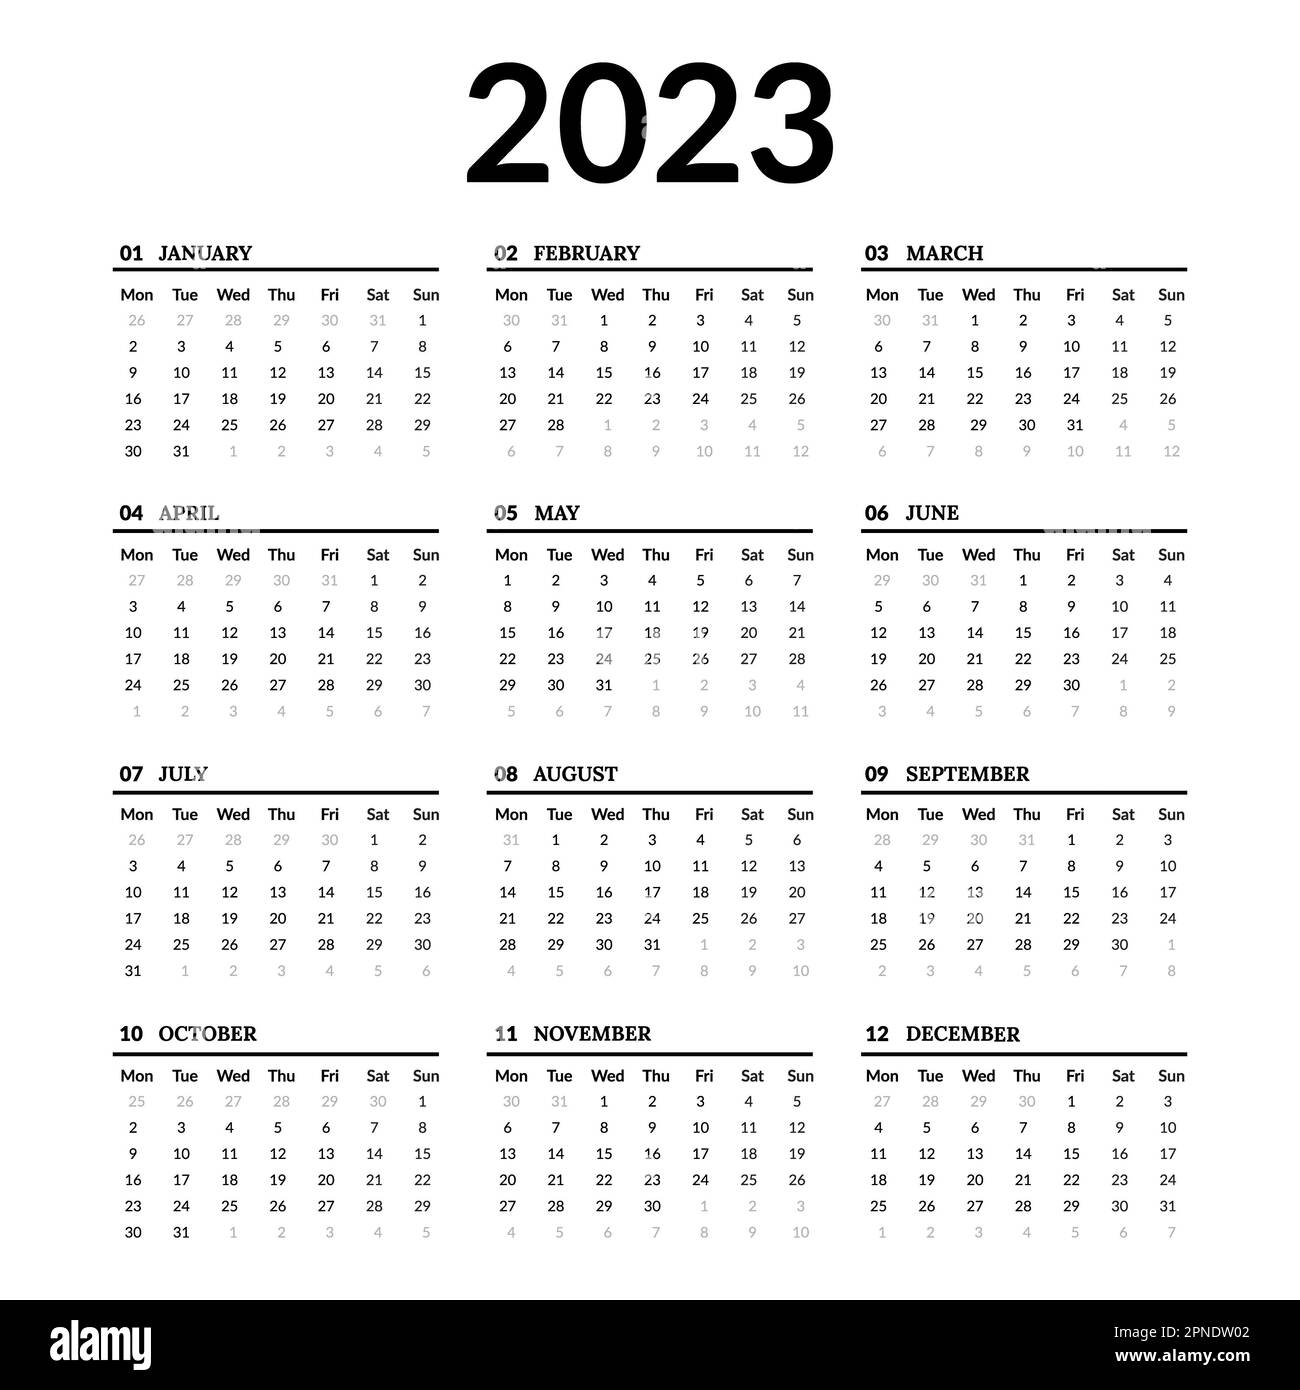 March calendar 2023 Cut Out Stock Images & Pictures - Page 3 - Alamy